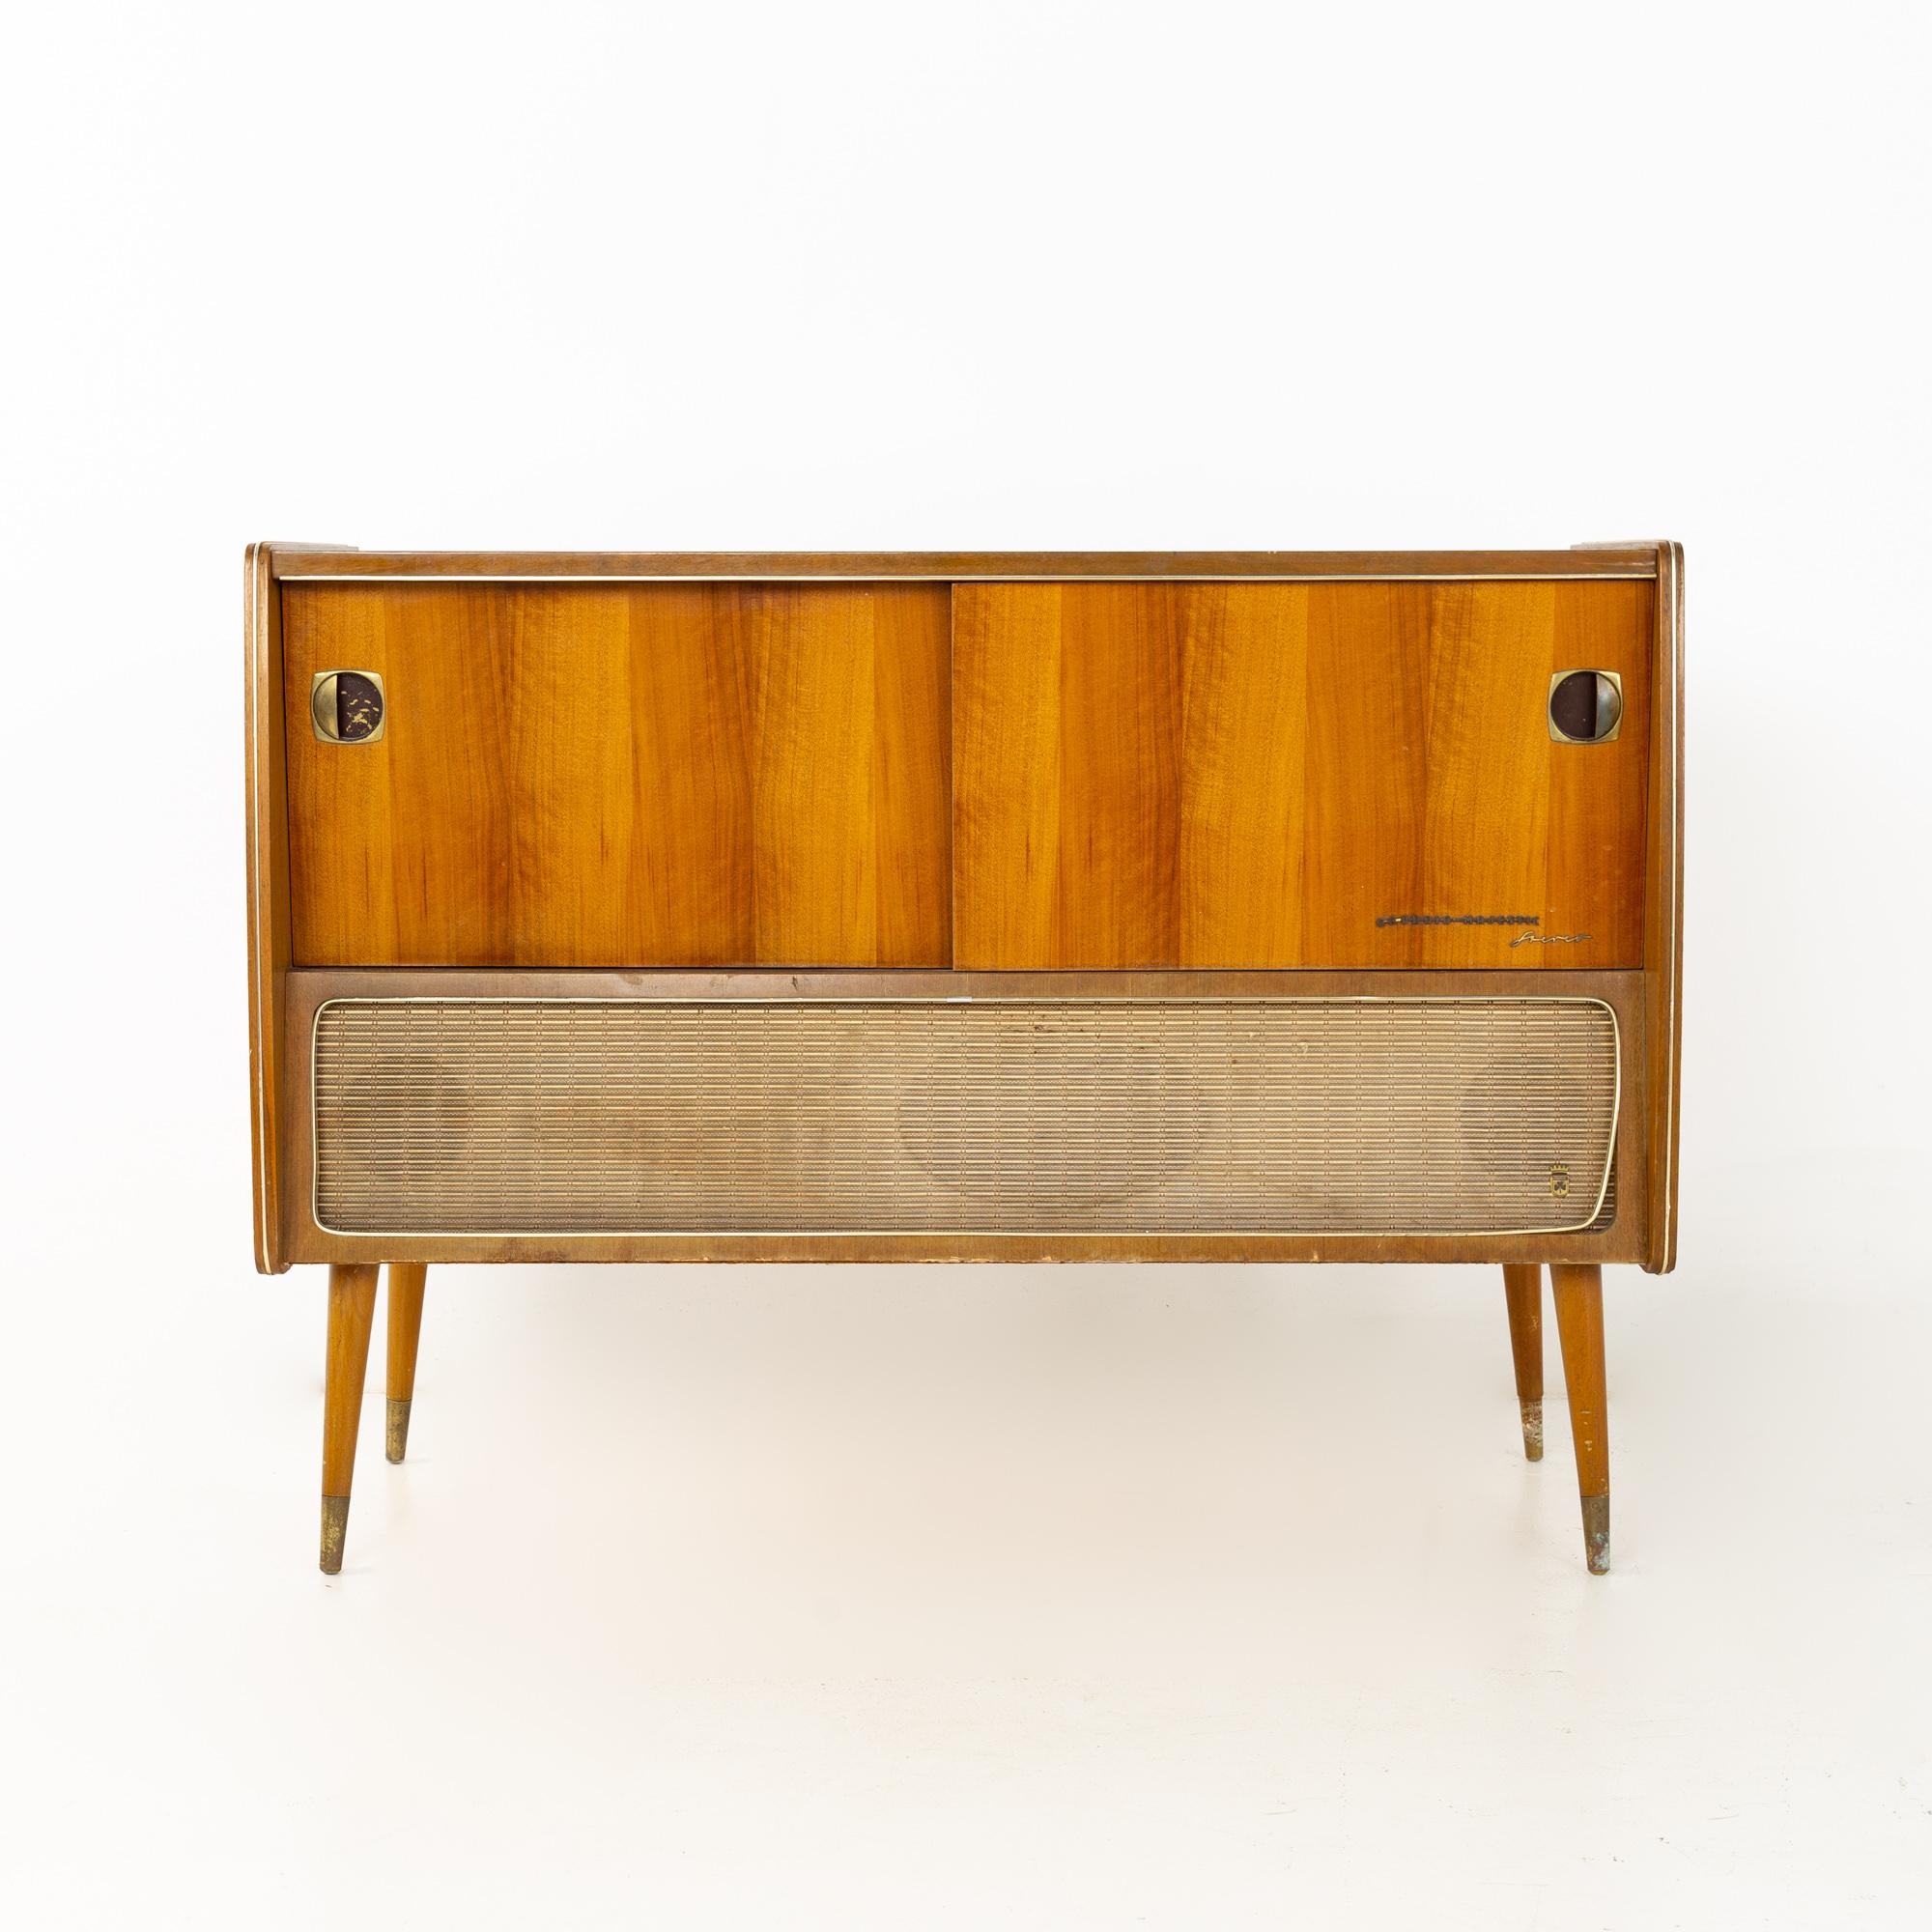 Grundig mid century stereo record console
This console is 44.5 wide x 17 deep x 33 inches high

All pieces of furniture can be had in what we call restored vintage condition. That means the piece is restored upon purchase so it’s free of